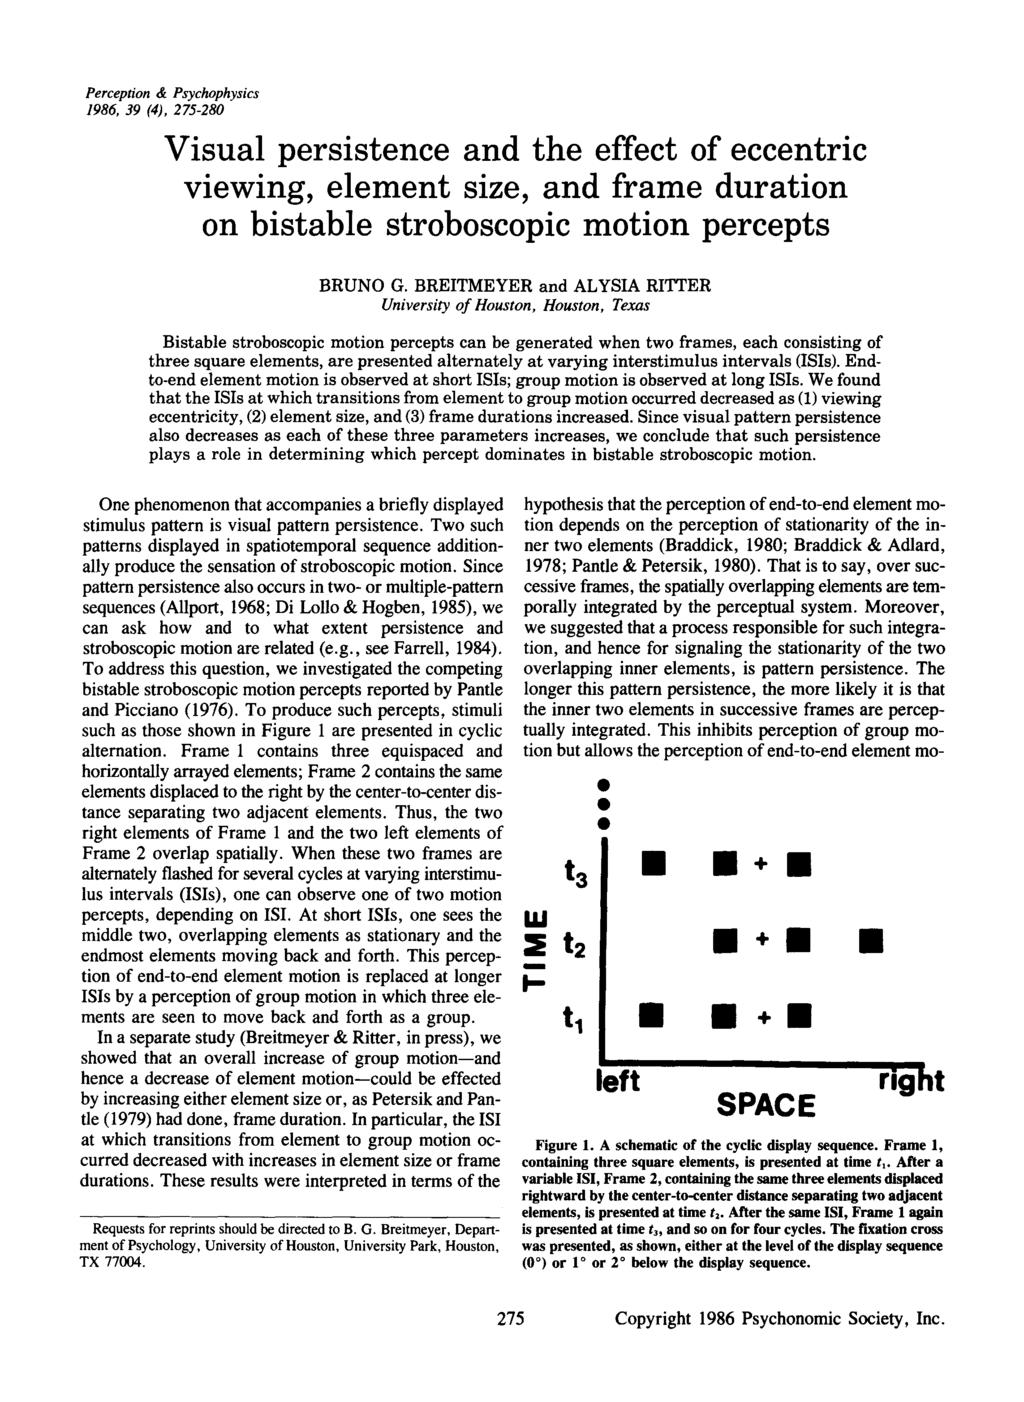 Perception & Psychophysics 1986, 39 (4), 275-280 Visual persistence and the effect of eccentric viewing, element size, and frame duration on bistable stroboscopic motion percepts BRUNO G.